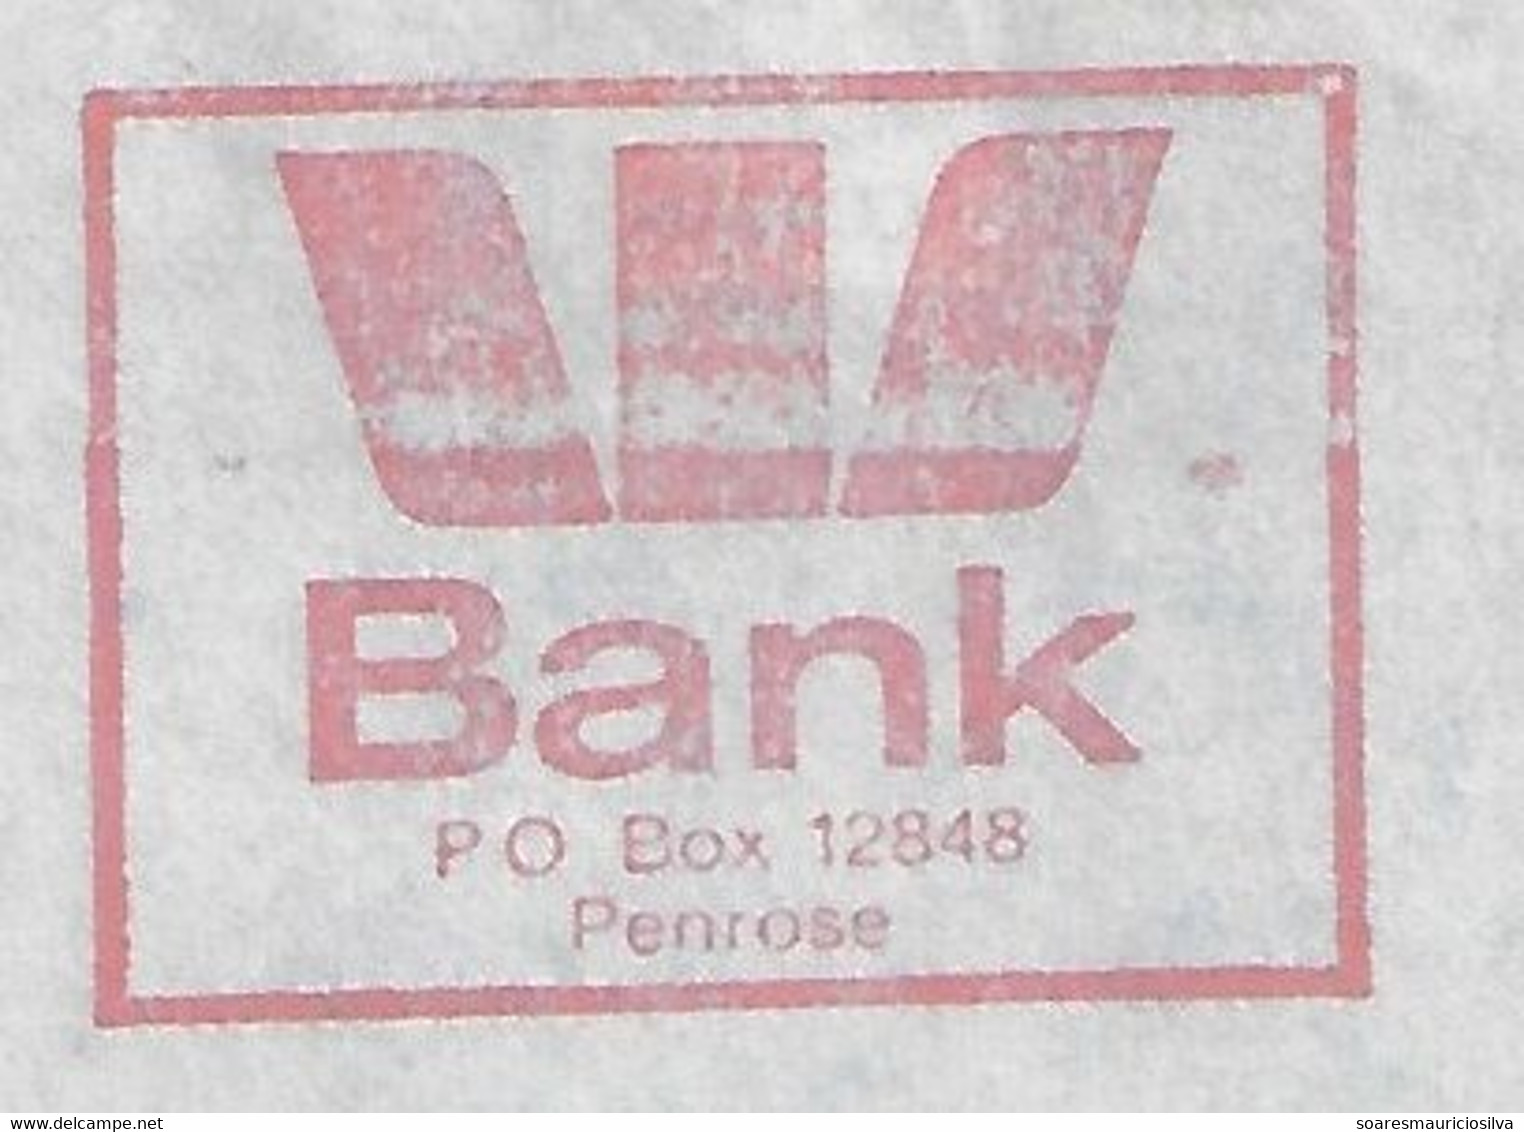 New Zealand 1990 Airmail Cover Meter Stamp Slogan W Bank Westpac Banking Corporation From Auckland - Briefe U. Dokumente